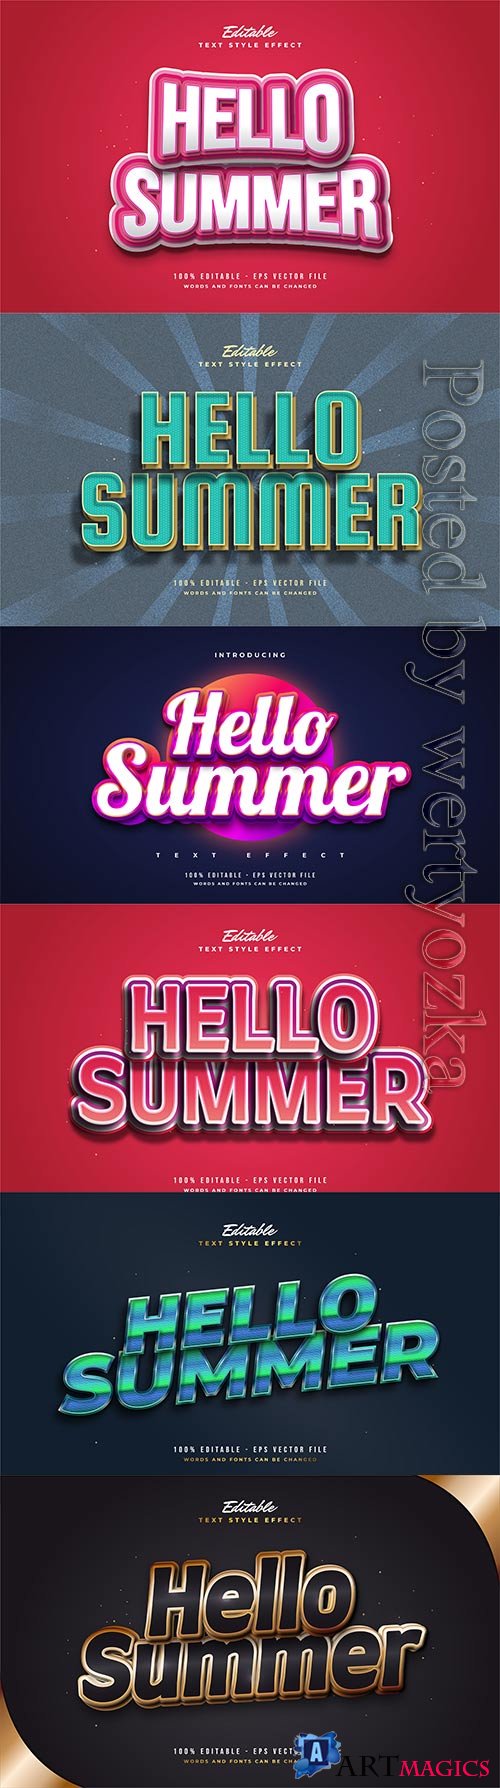 Hello summer text with cartoon style